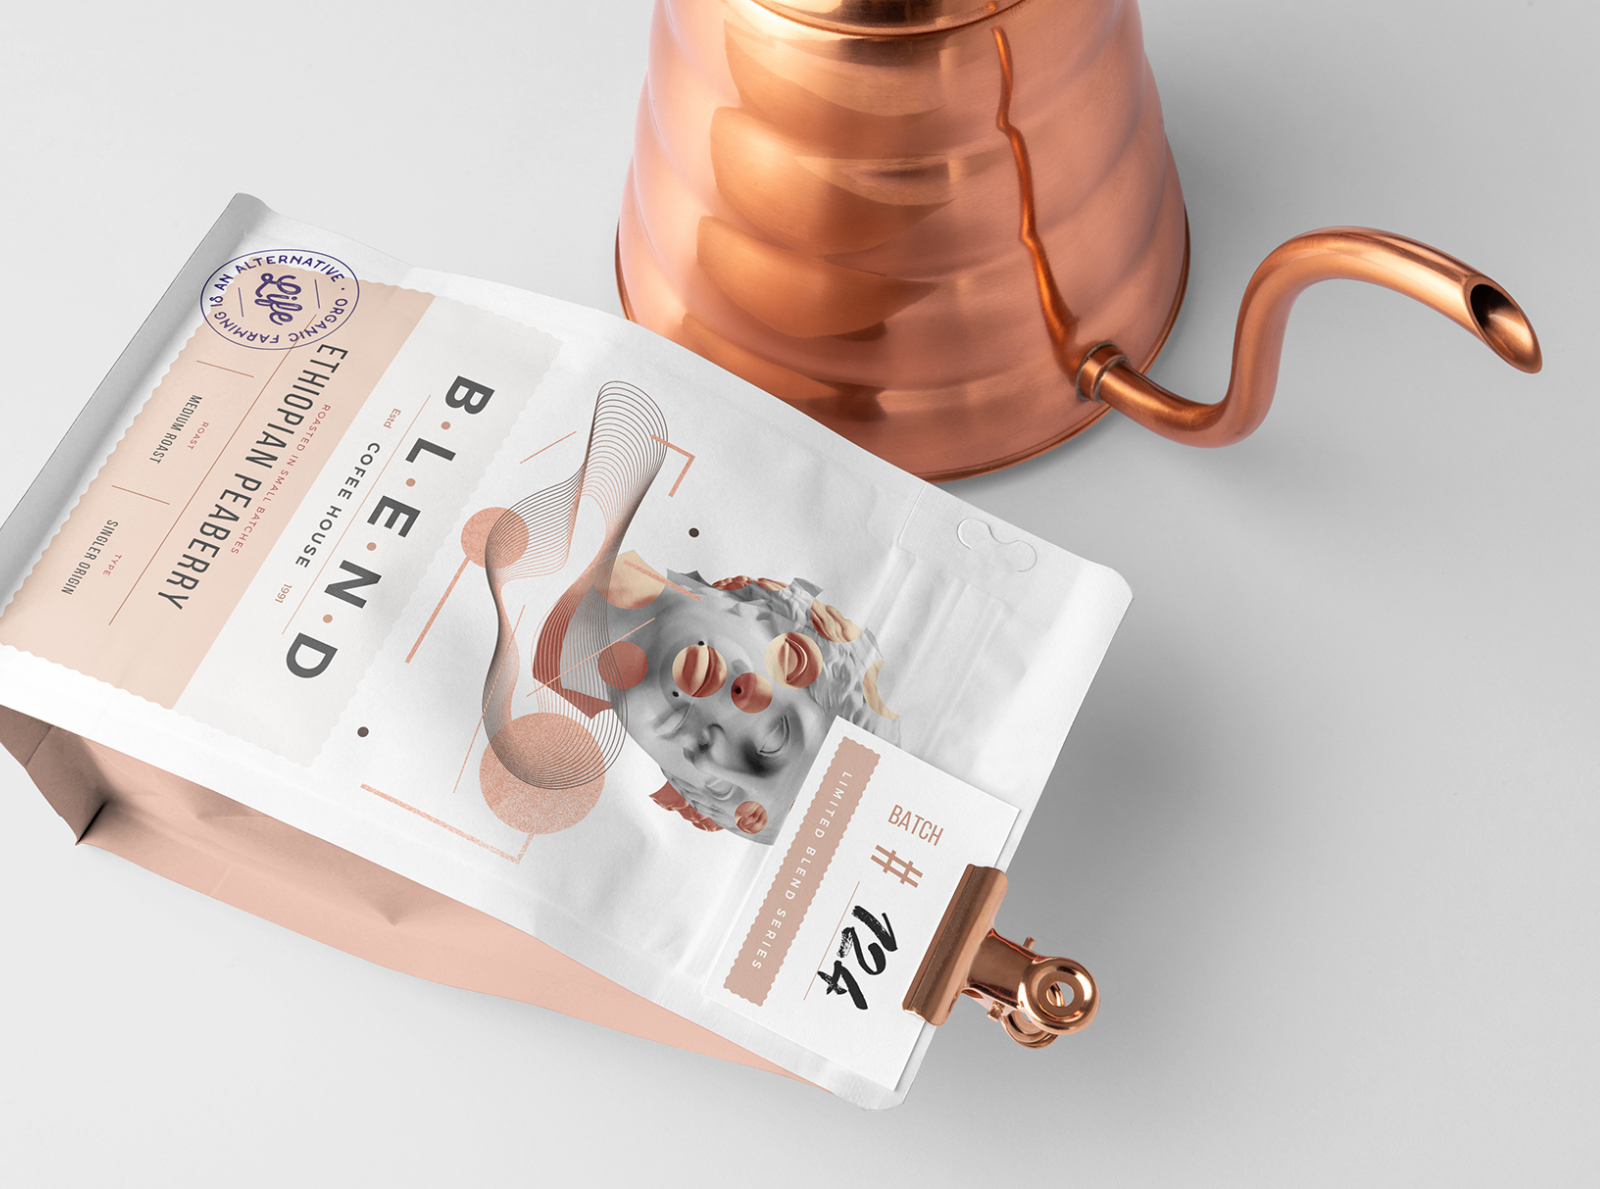 Download Free New Blend Coffeehouse Branding Mockup By Mockup Cloud On Dribbble PSD Mockups.